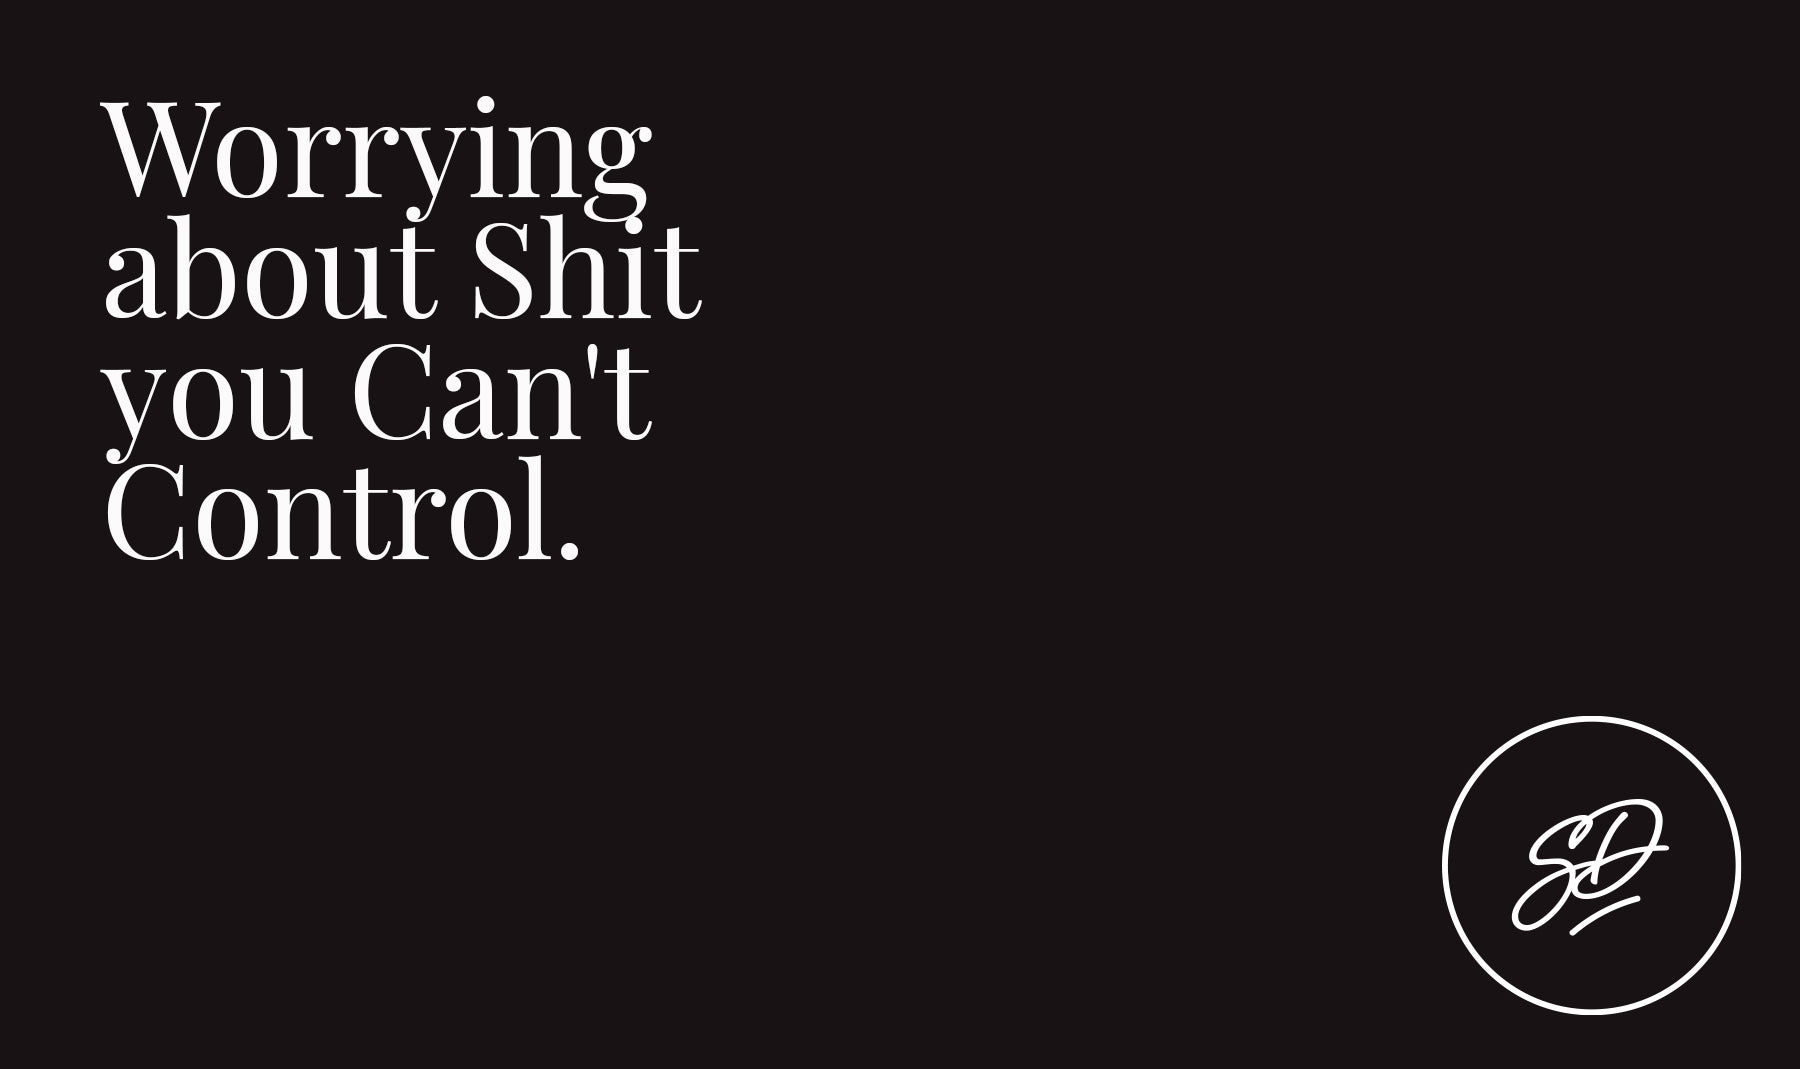 Worrying about Shit you Can't Control.